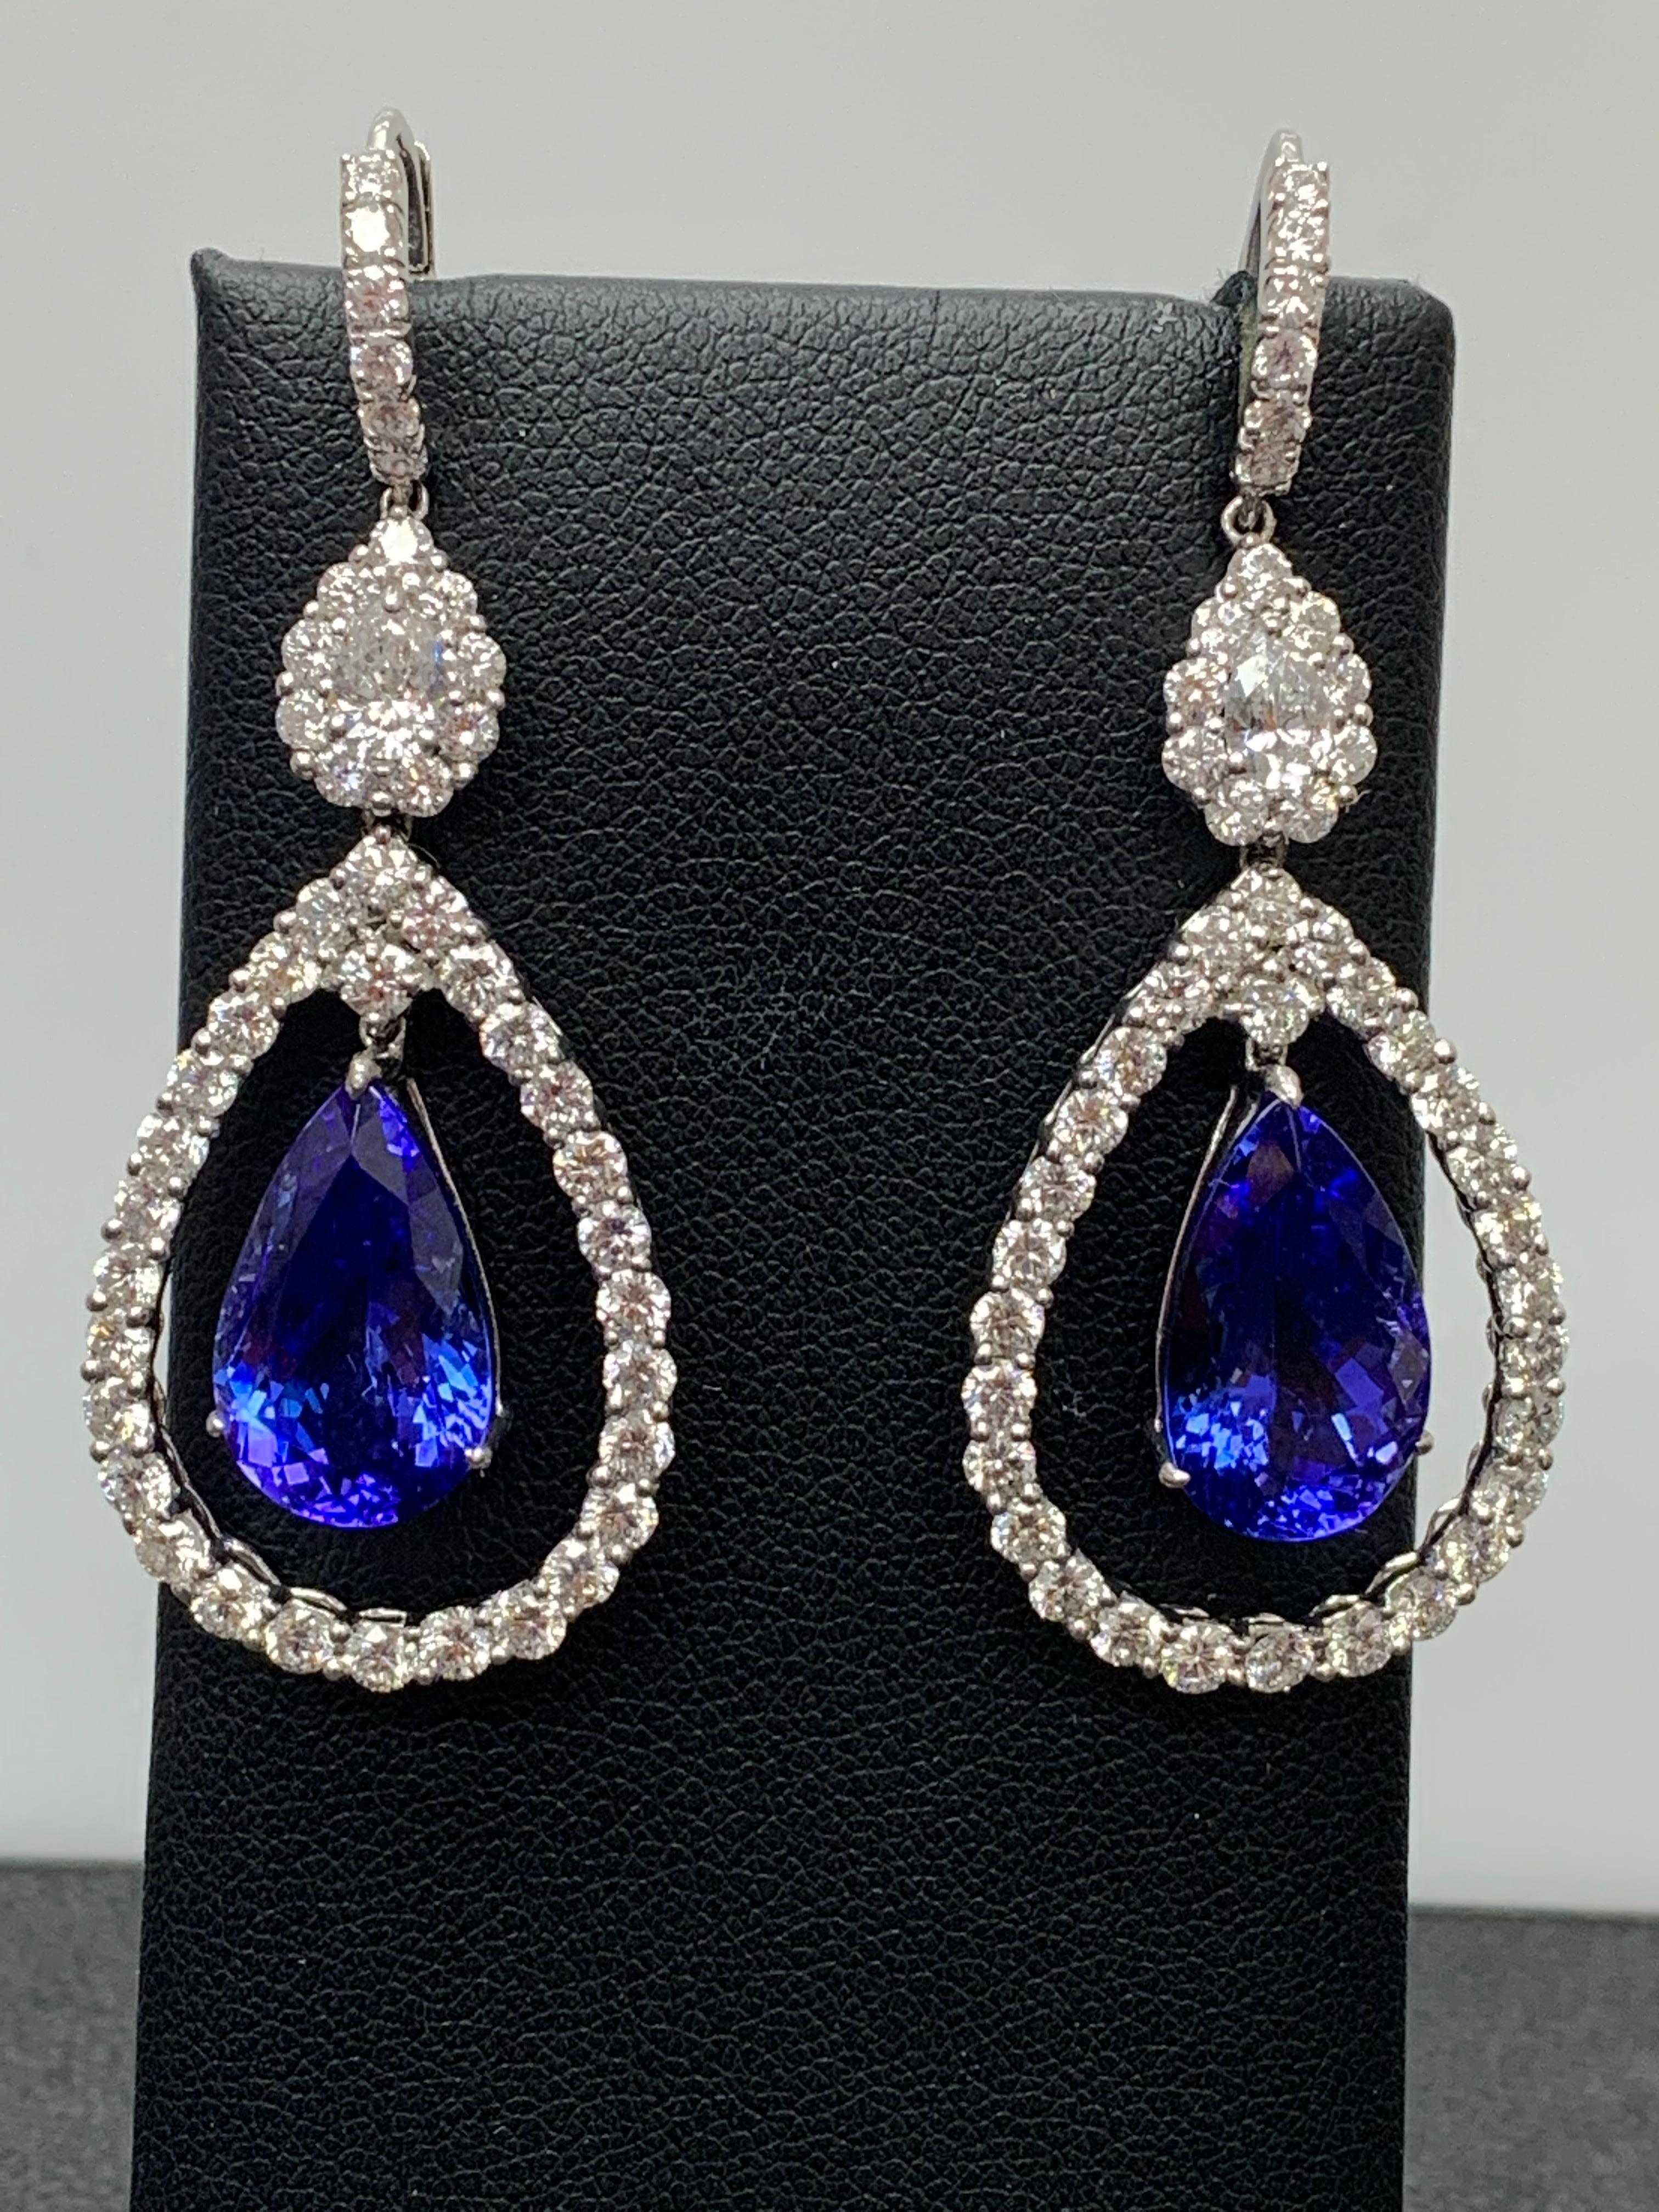 Dangle earrings featuring 2 Pear shape Tanzanites weighing 11.35 carats total, Set in an open work design. Surrounded by a row of round brilliant diamonds. 88 Accent Diamonds weigh 4.10 carats and 2 pear shape diamonds weigh 0.61 carats in total.